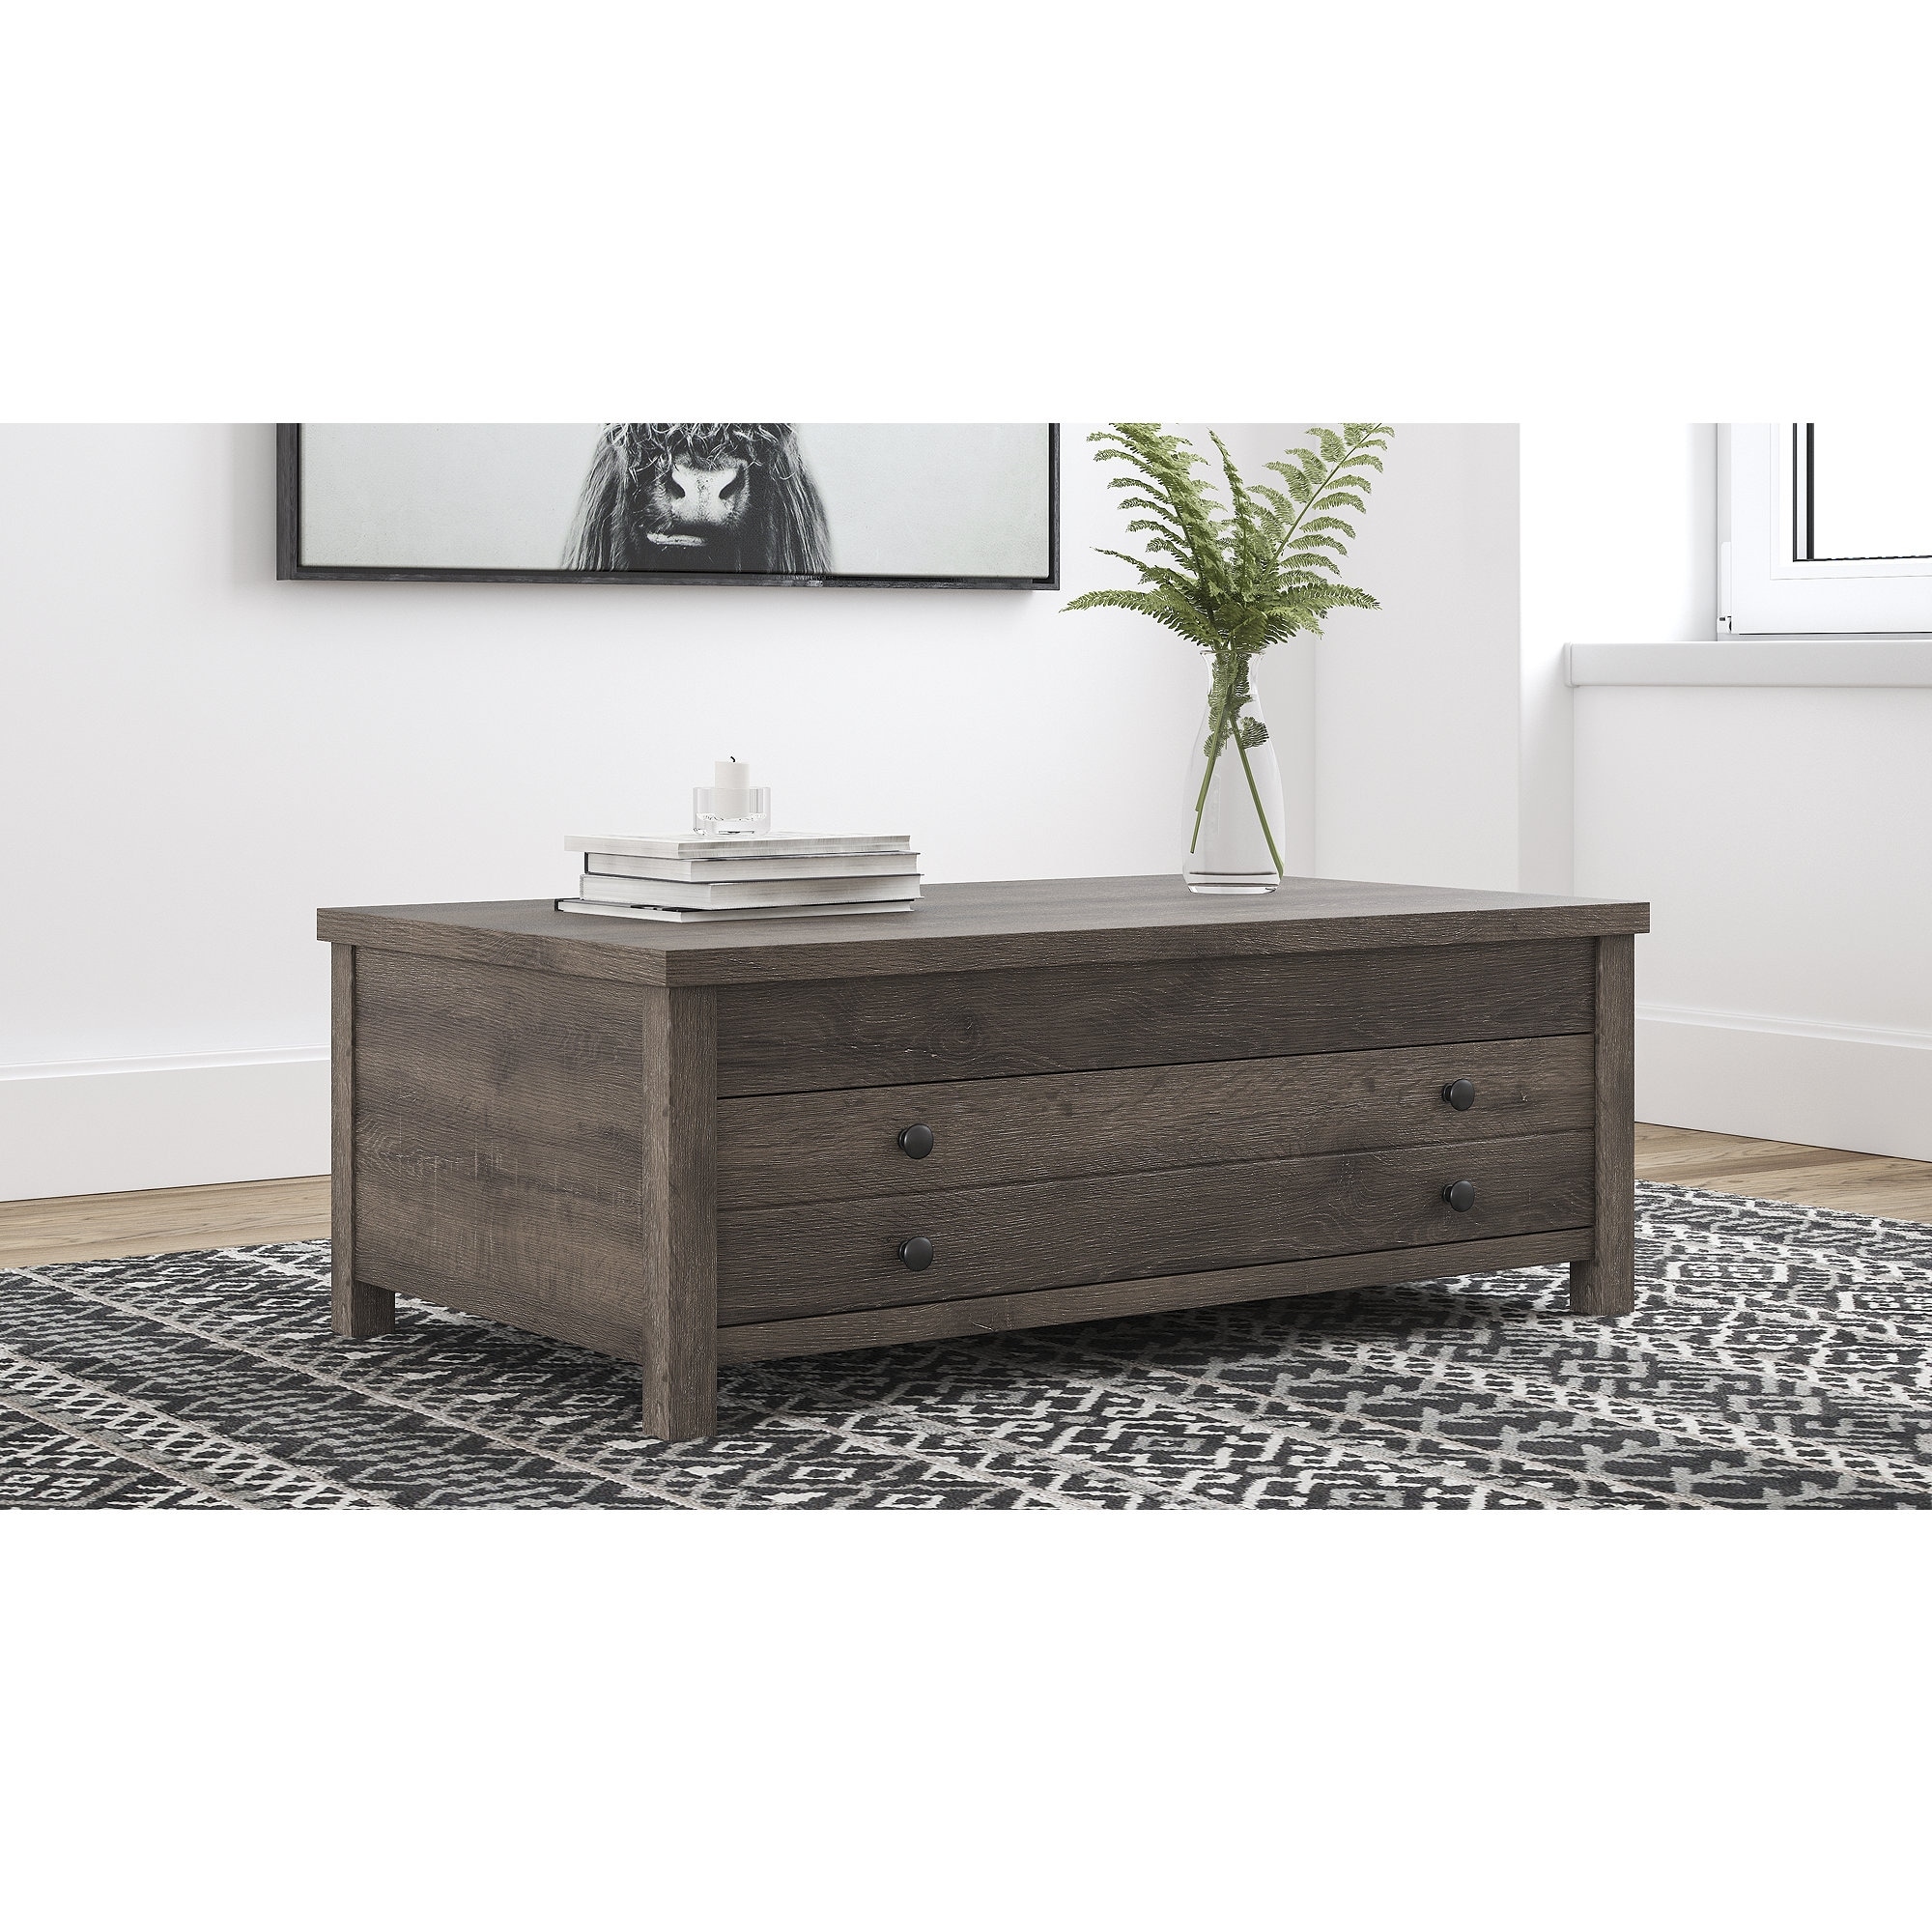 The Arlenbry Gray Lift-top Cocktail Table